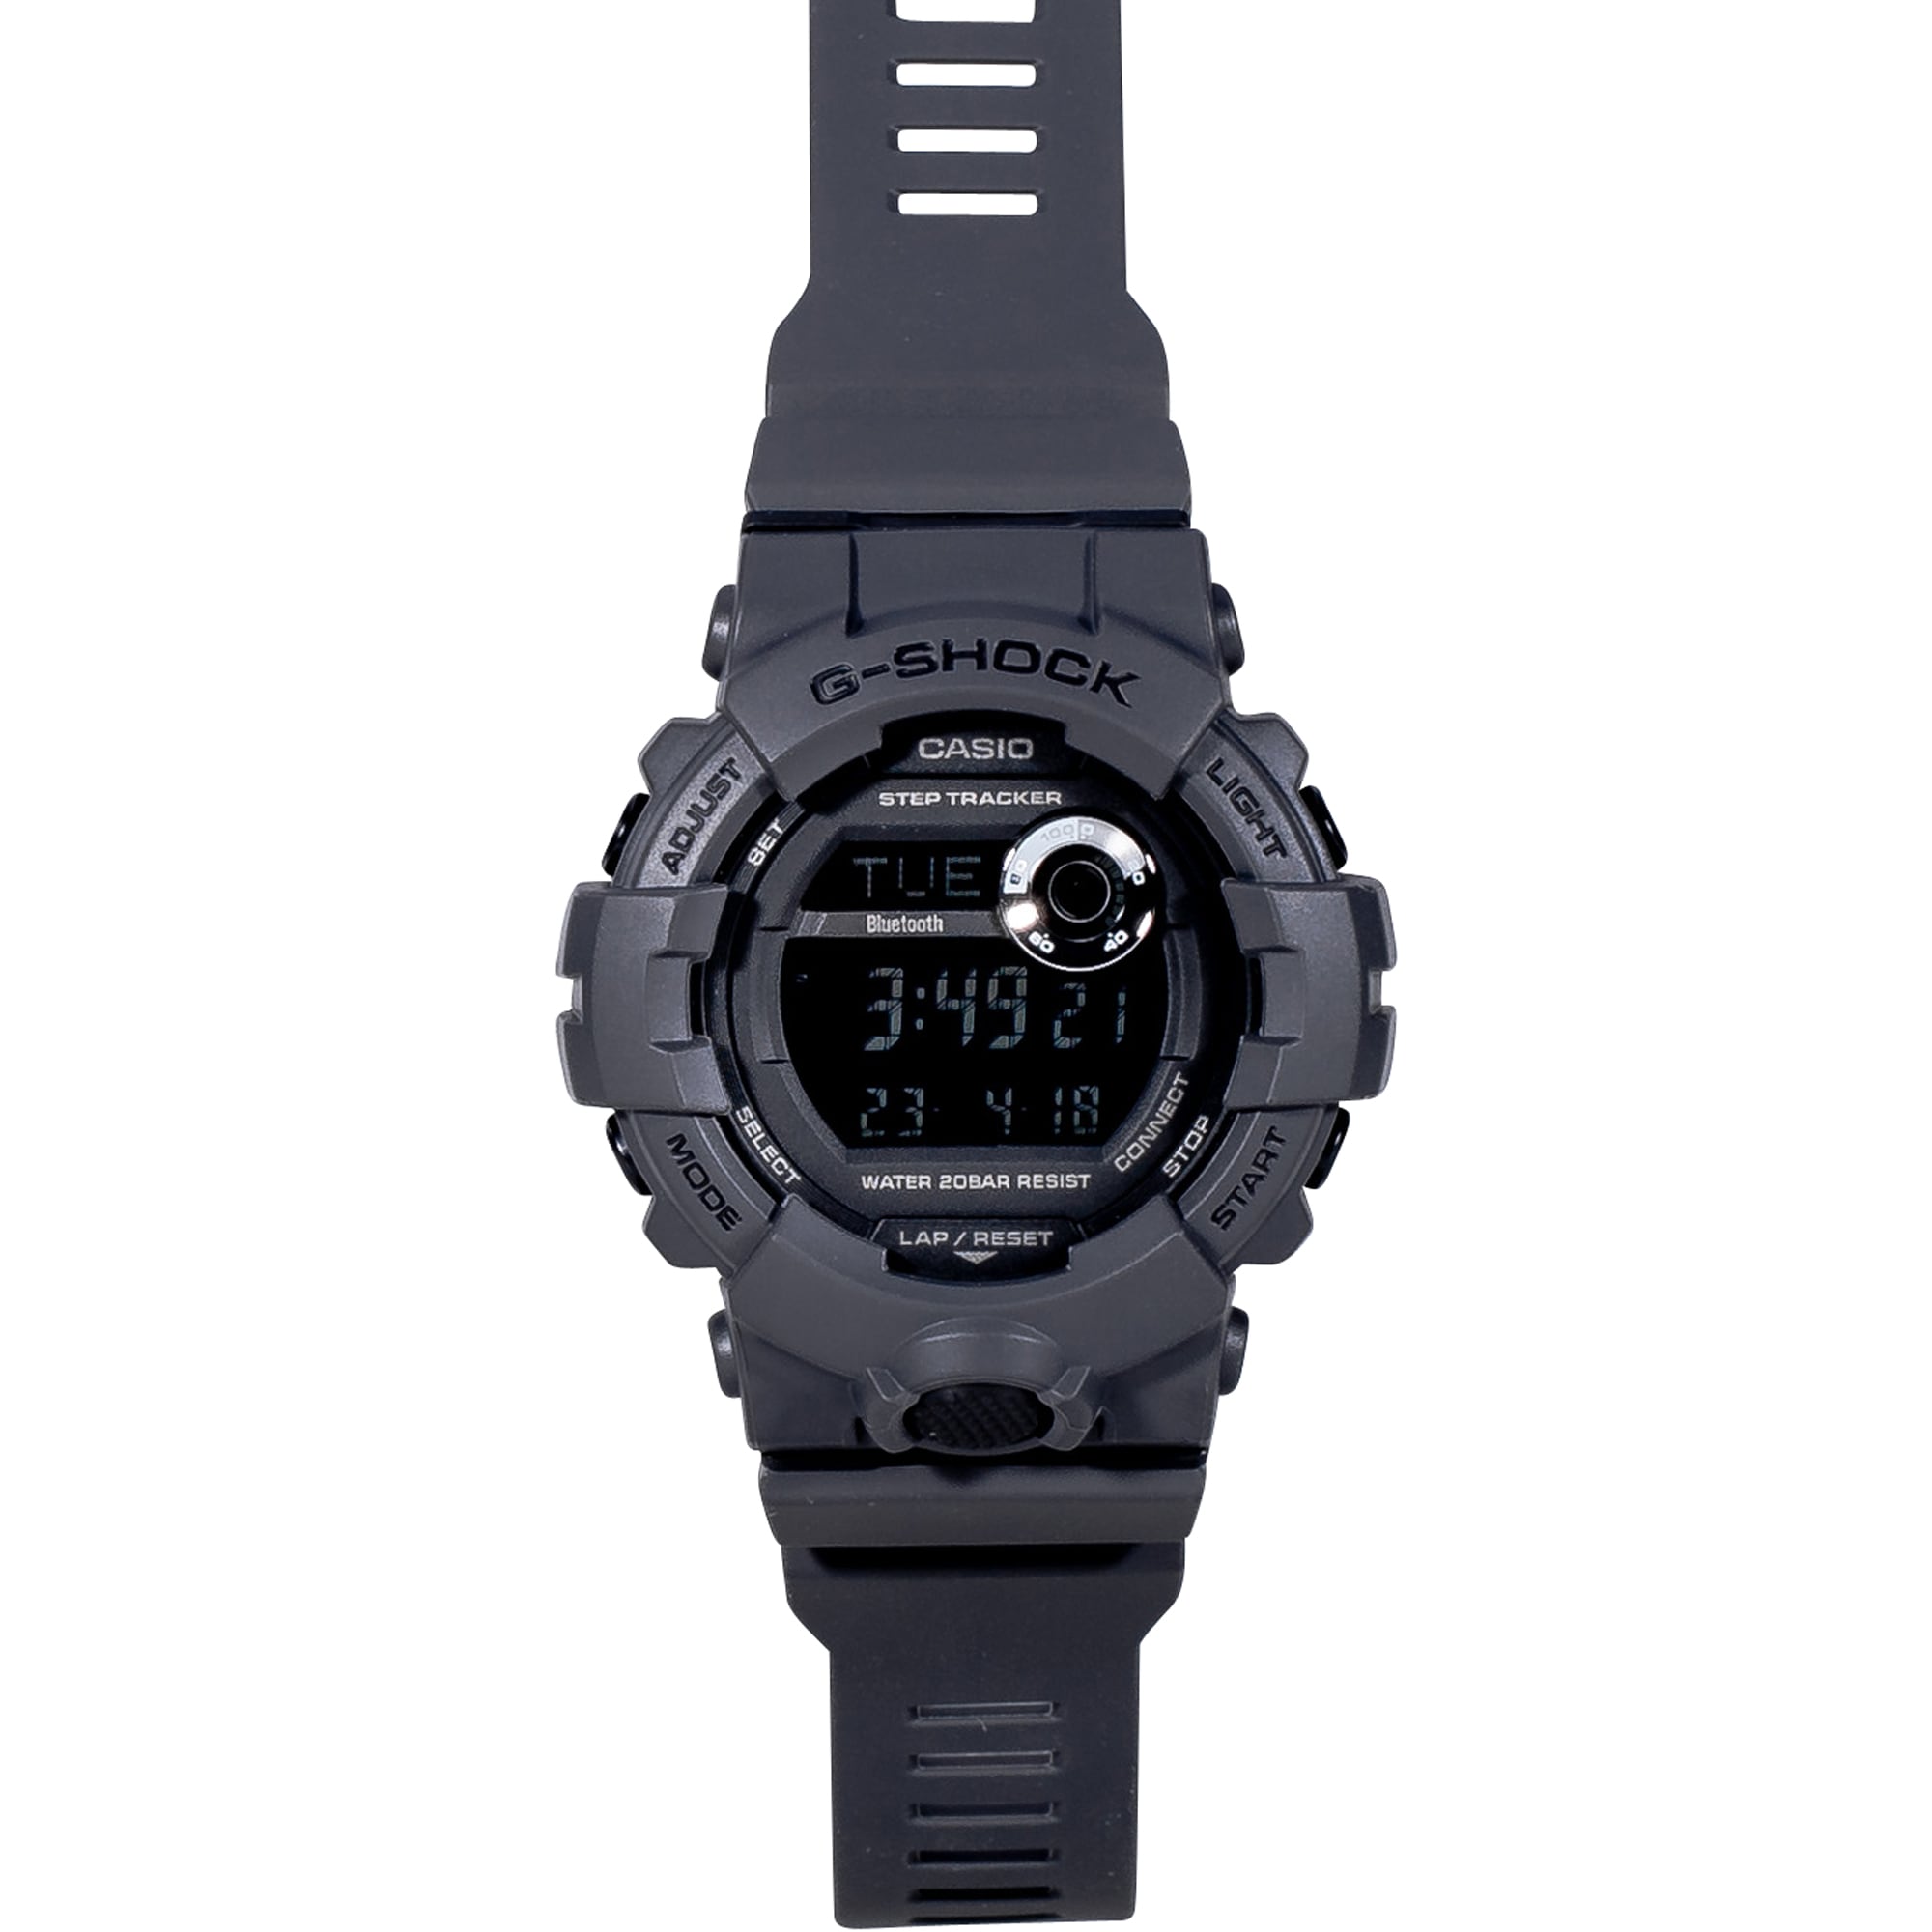 Purchase the Casio G-Shock G-Squad GBD-800UC-8ER Watch black by